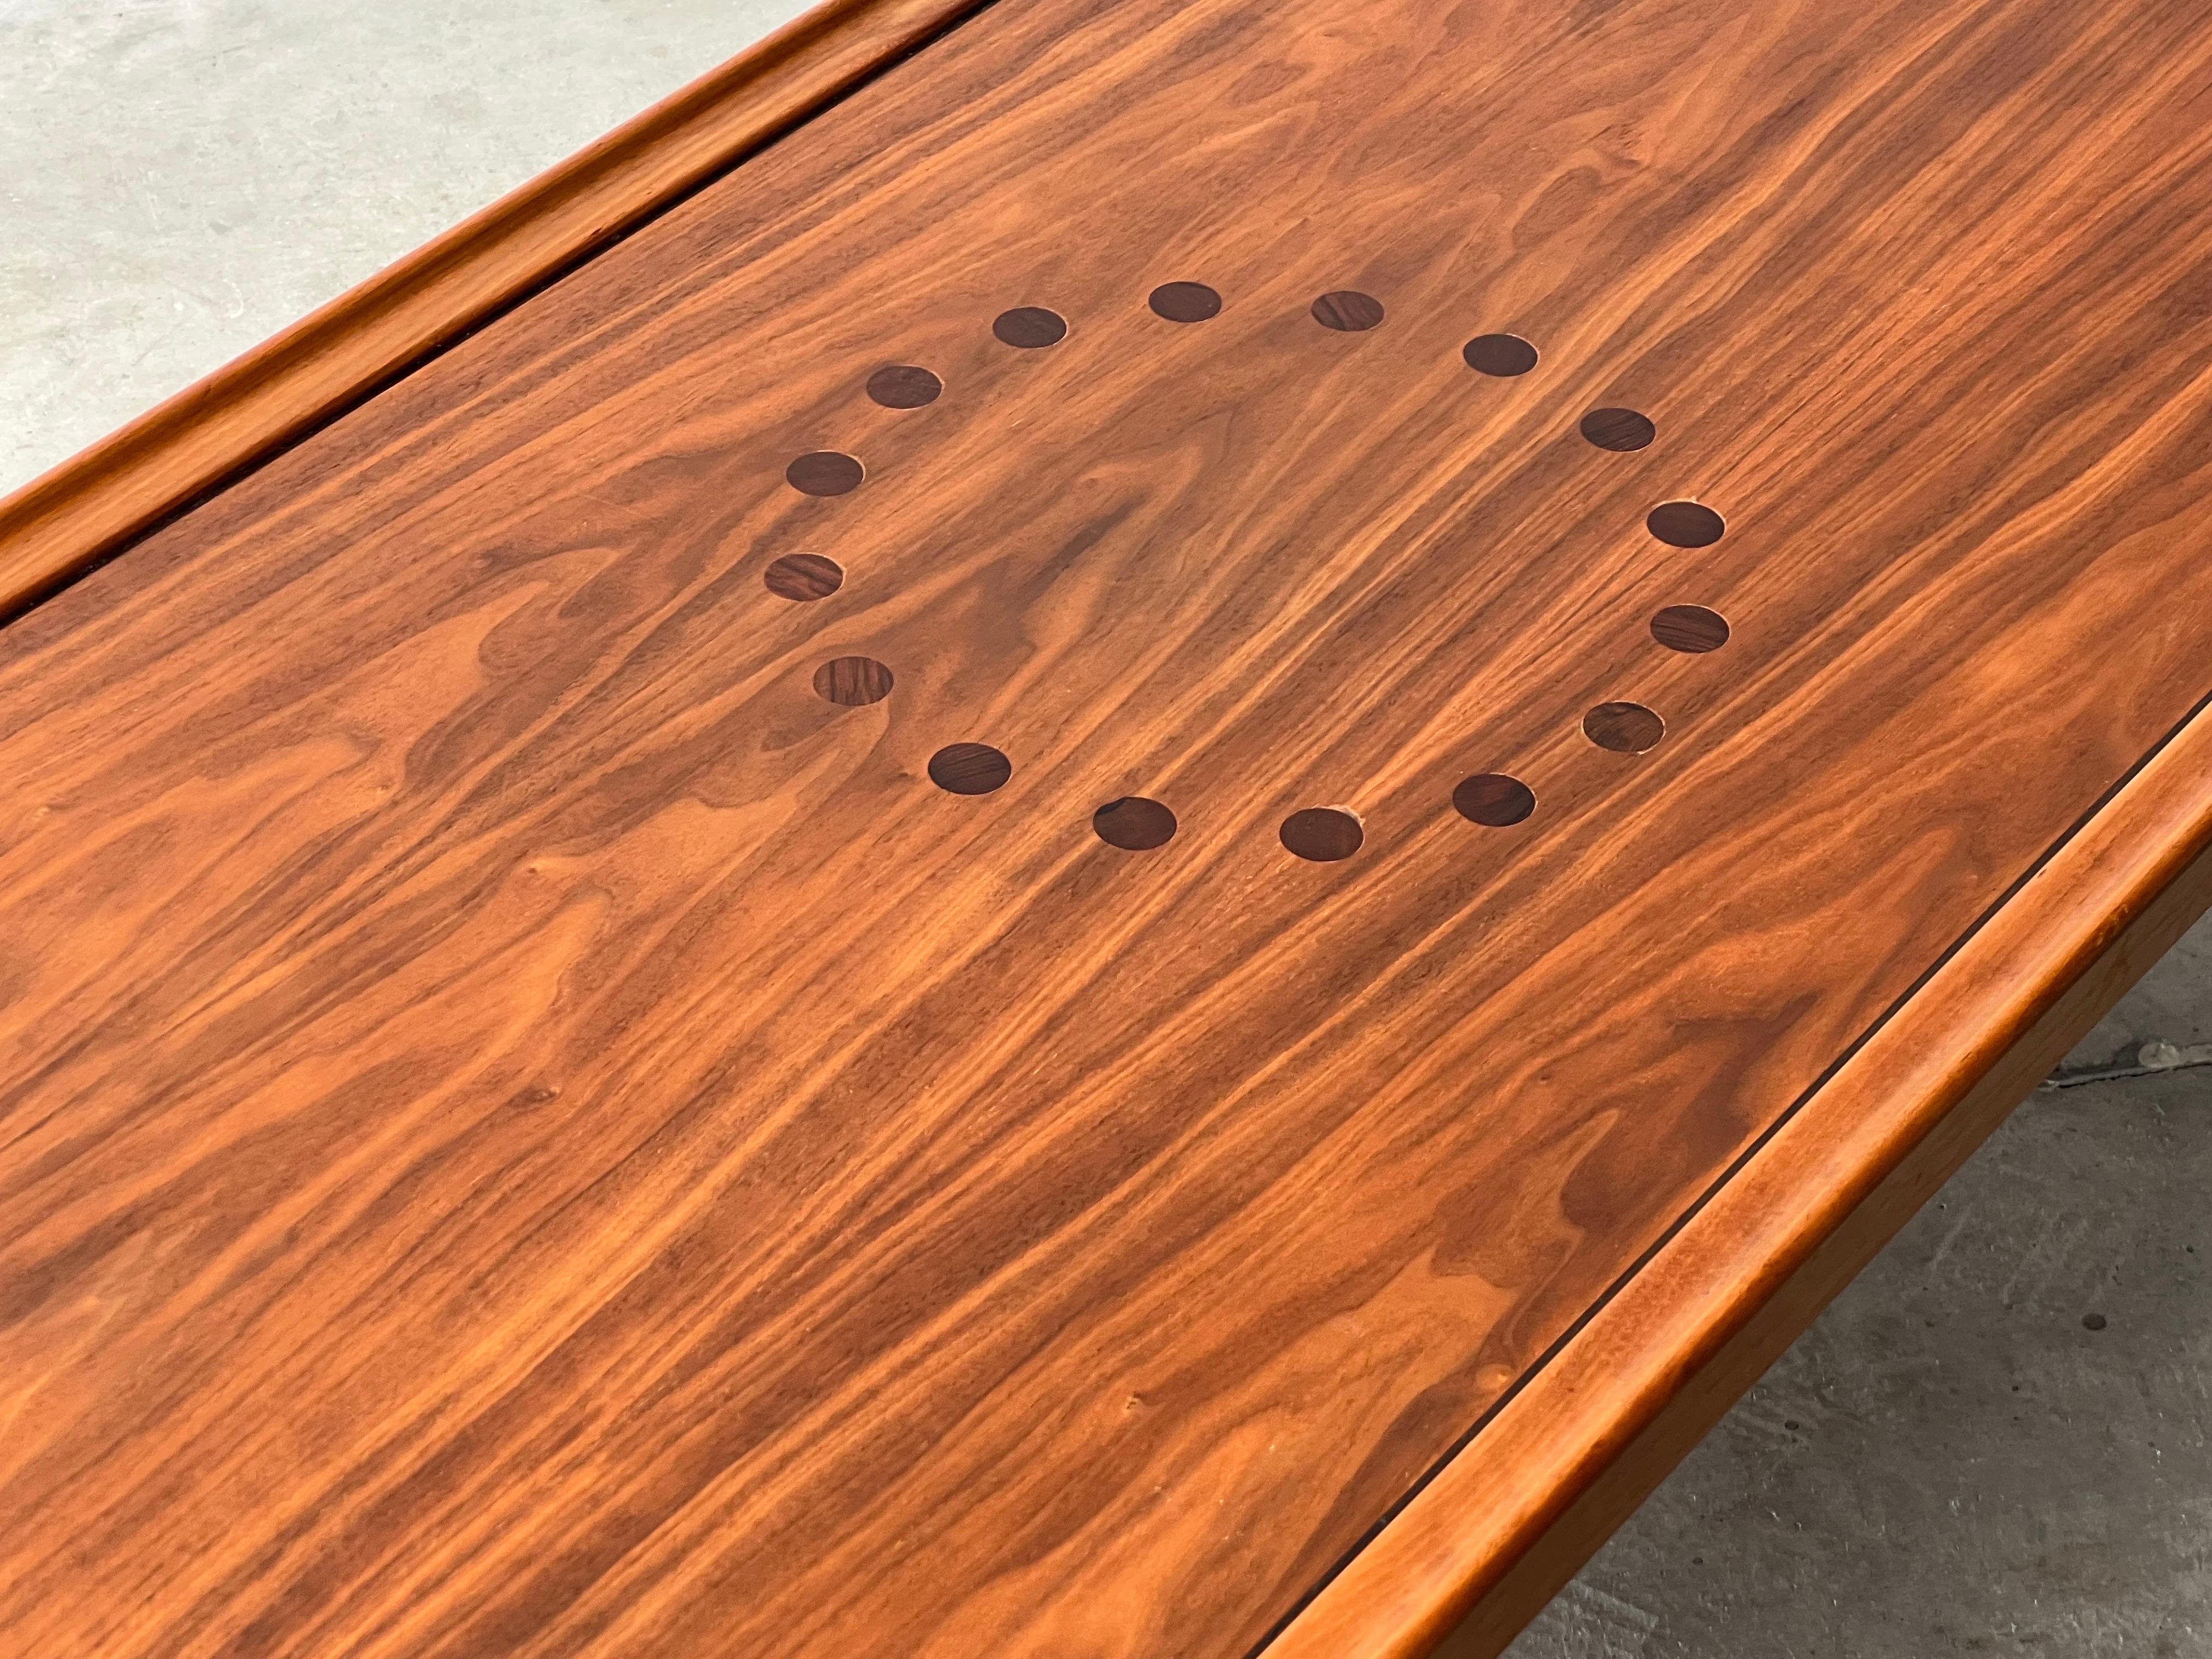 Mid-Century Drexel Declaration Walnut Coffee Table. Designed by Kipp Stewart and Stewart MacDougall for Drexel in the late 1950’s. This table shows beautiful details with rosewood inlay circle pattern and lipped edges. Very minor patina present and